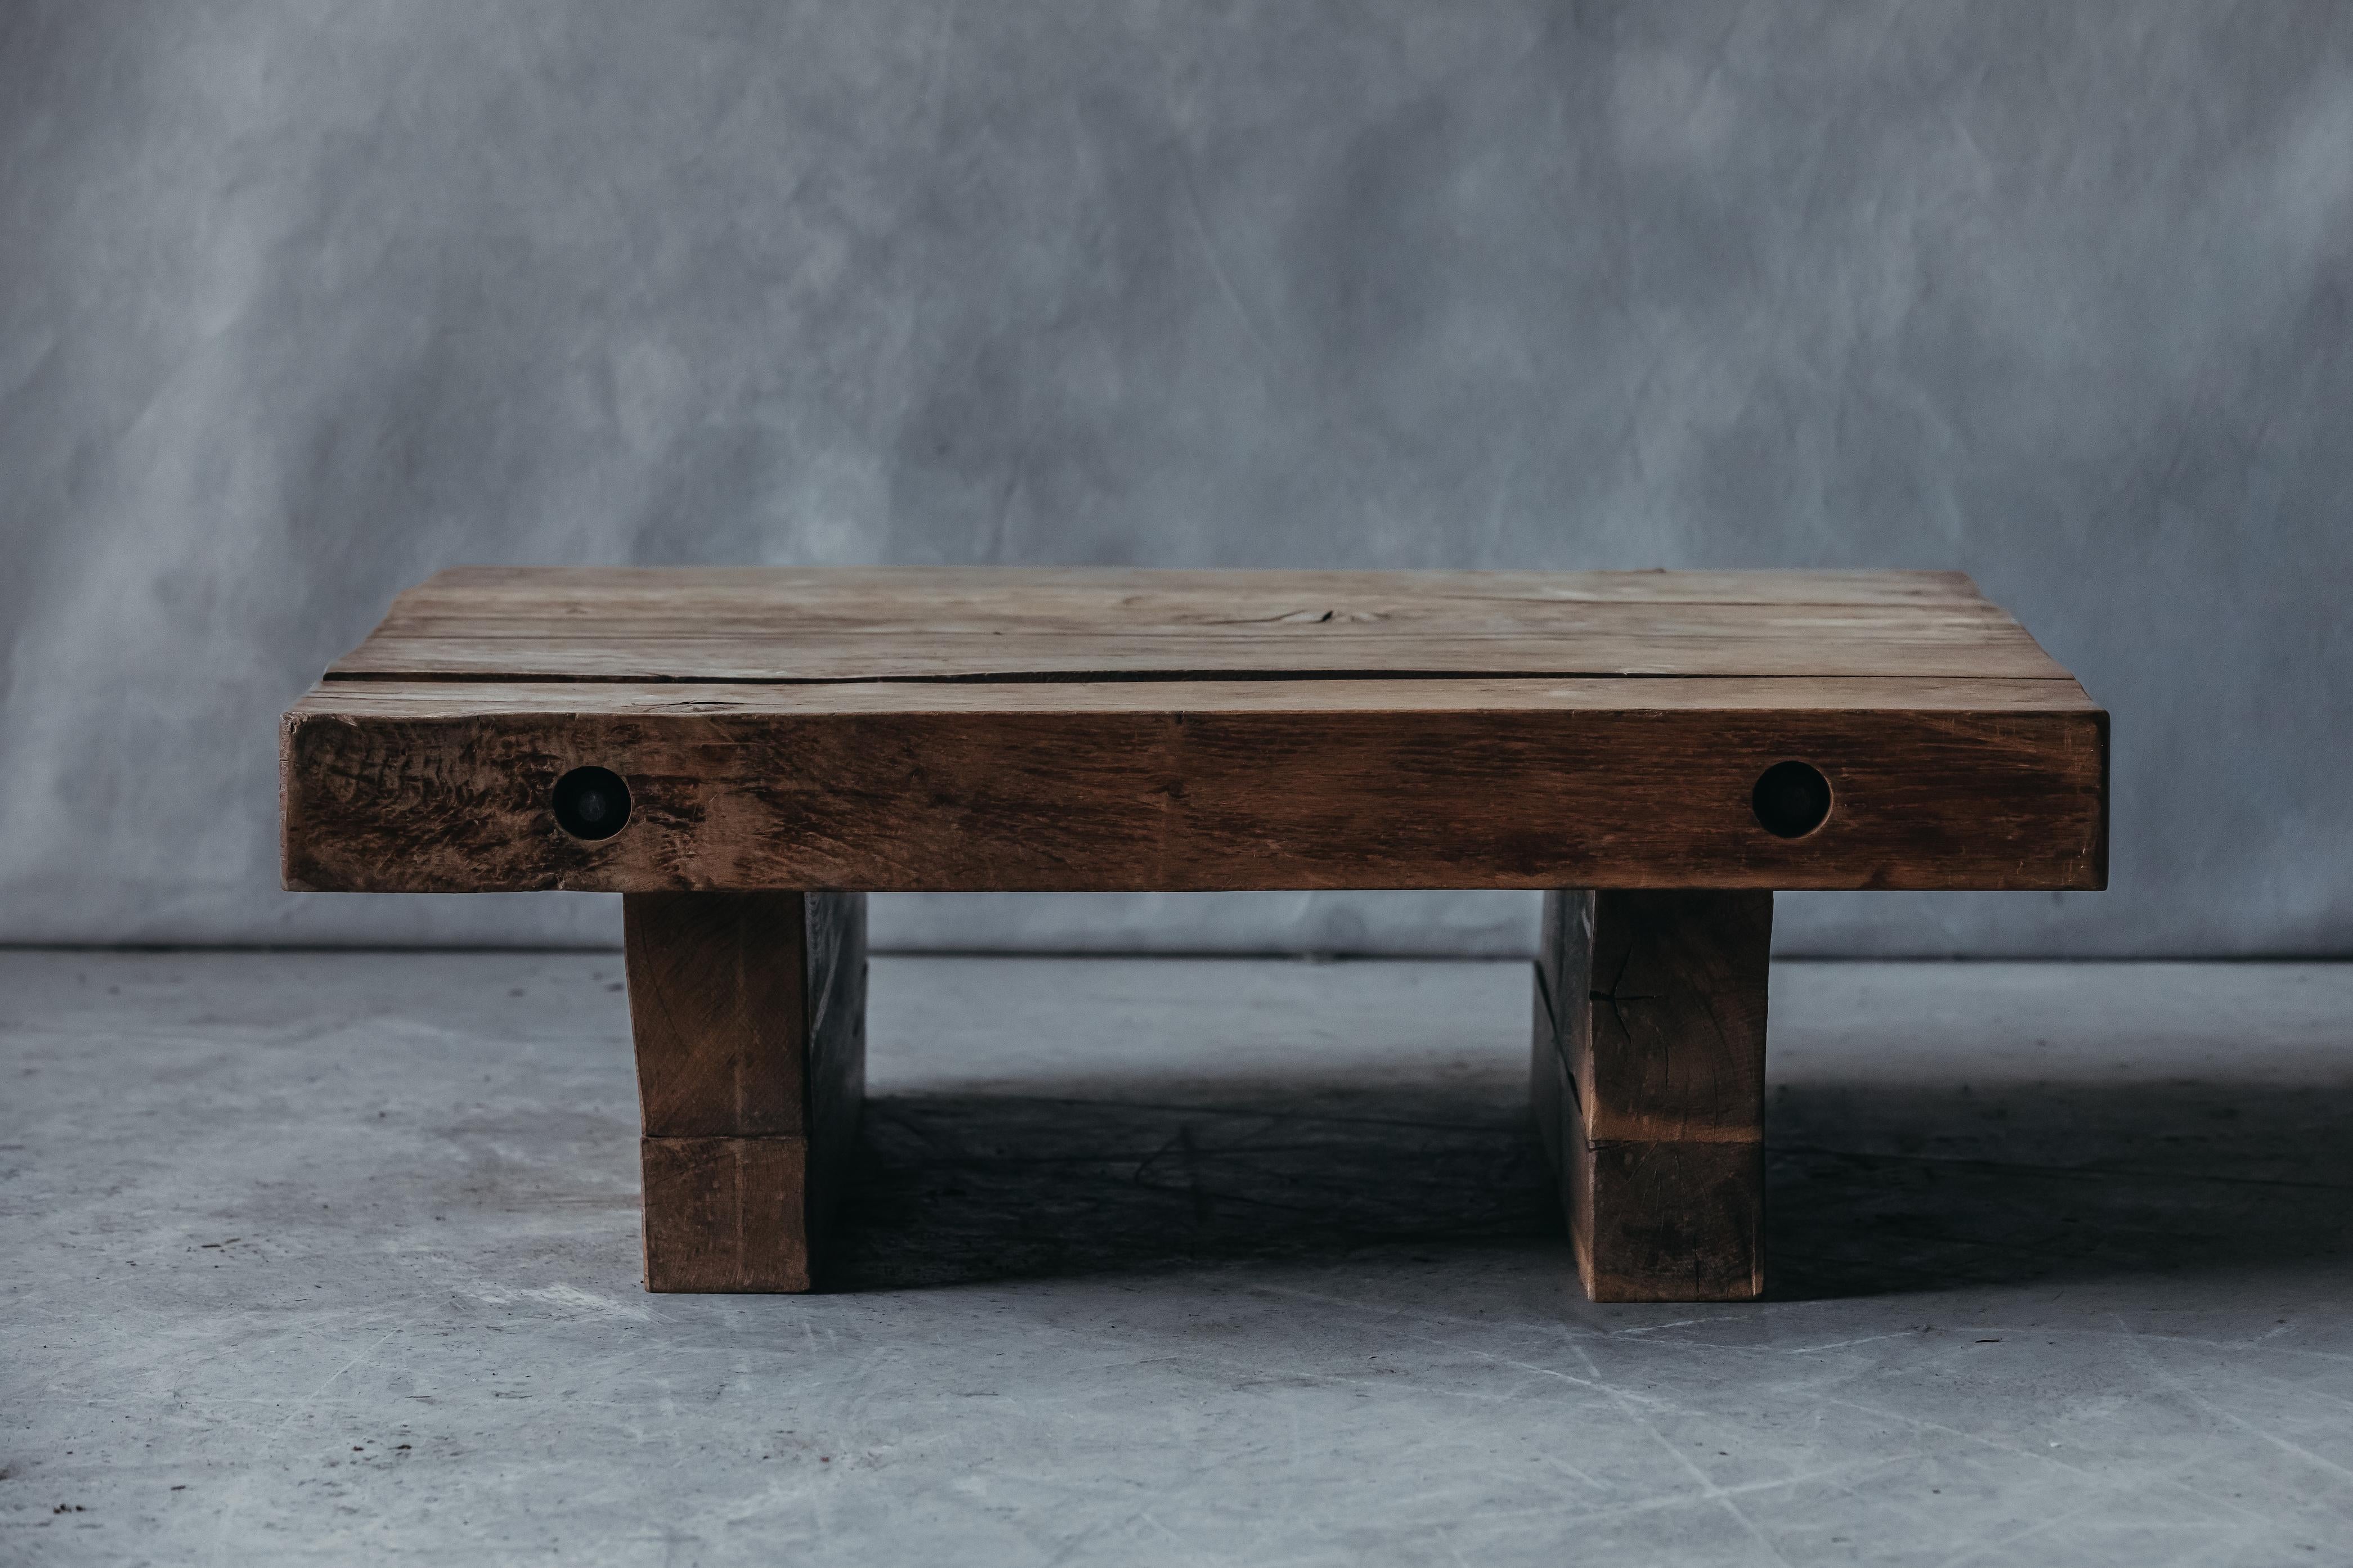 Vintage Solid Oak Coffee Table From France, circa 1970. Solid oak construction with nice patina and use.